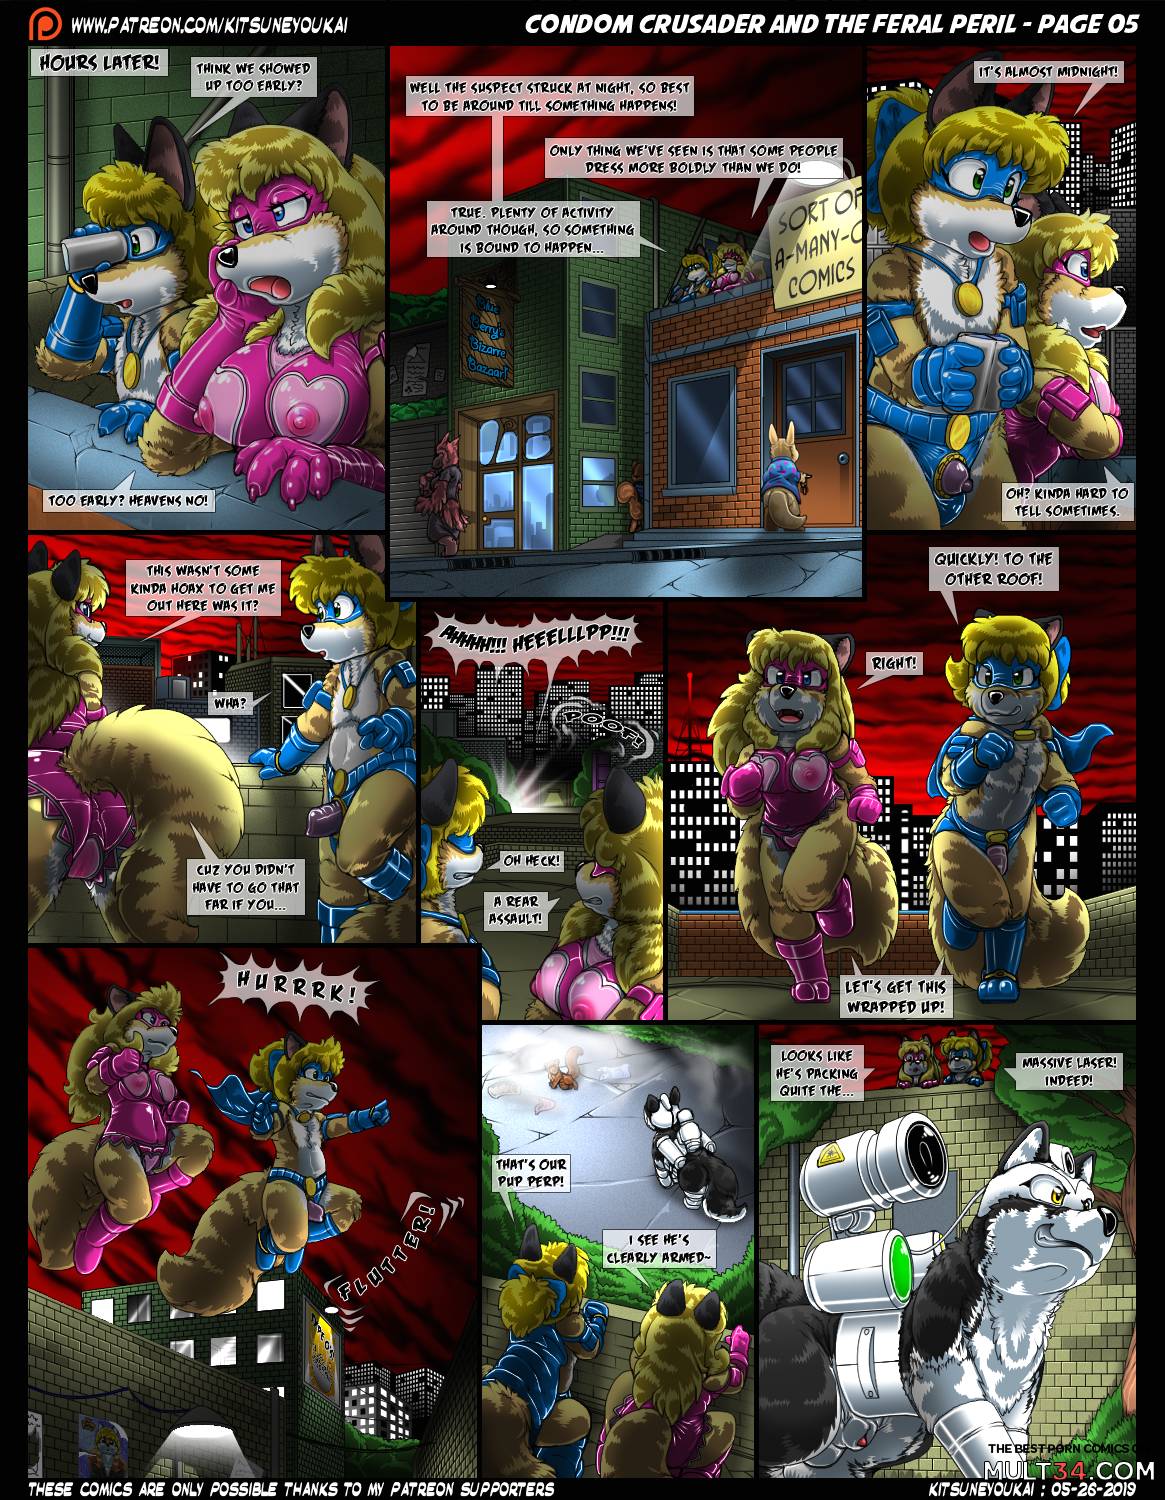 Condom Crusader and the Feral Peril page 5